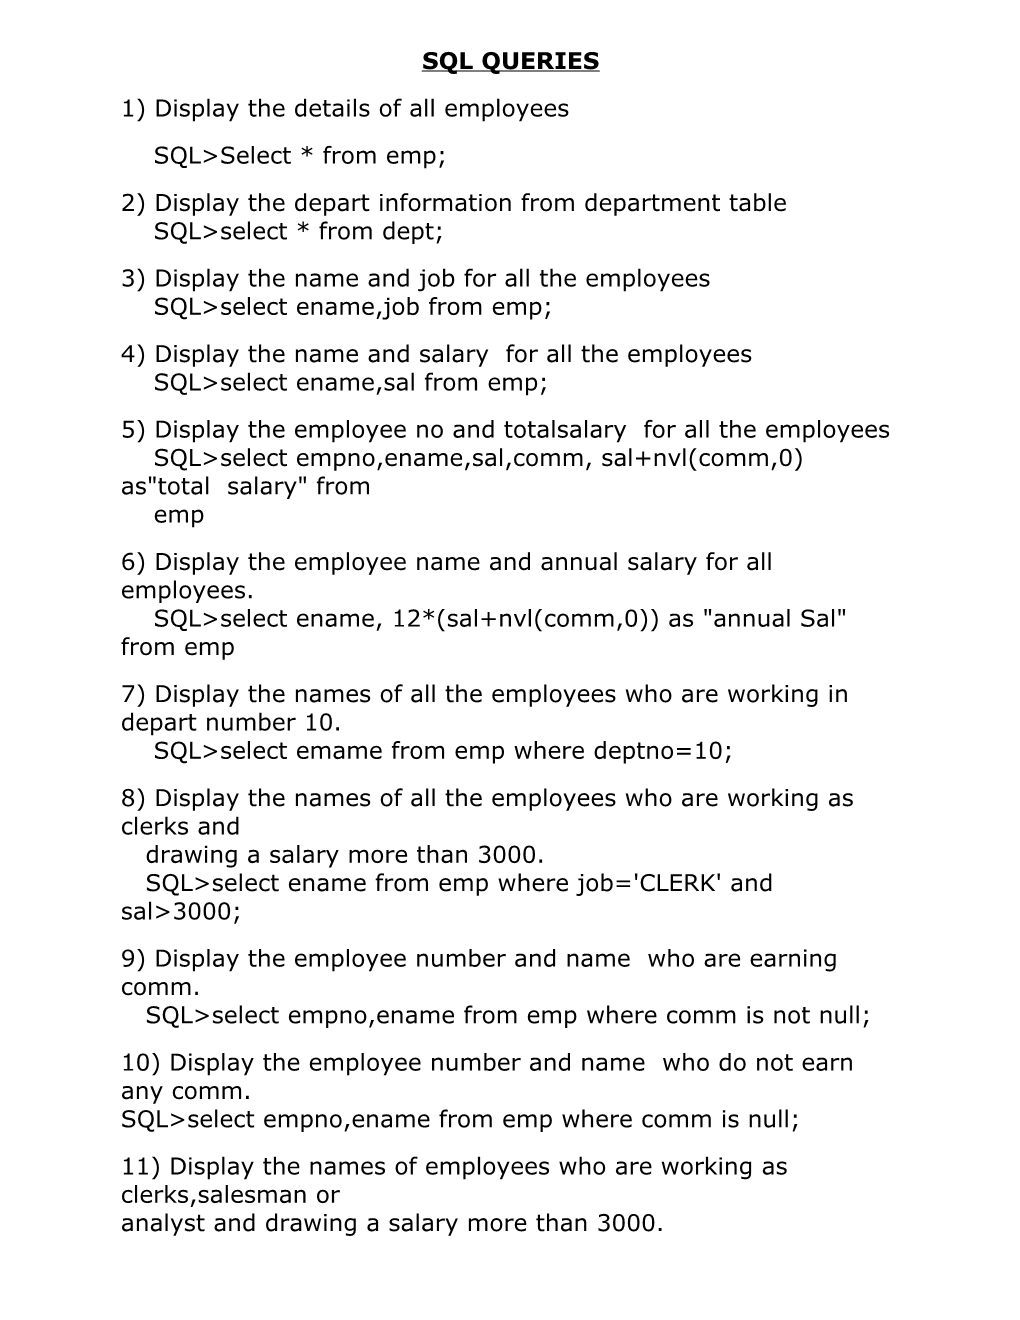 1) Display the Details of All Employees